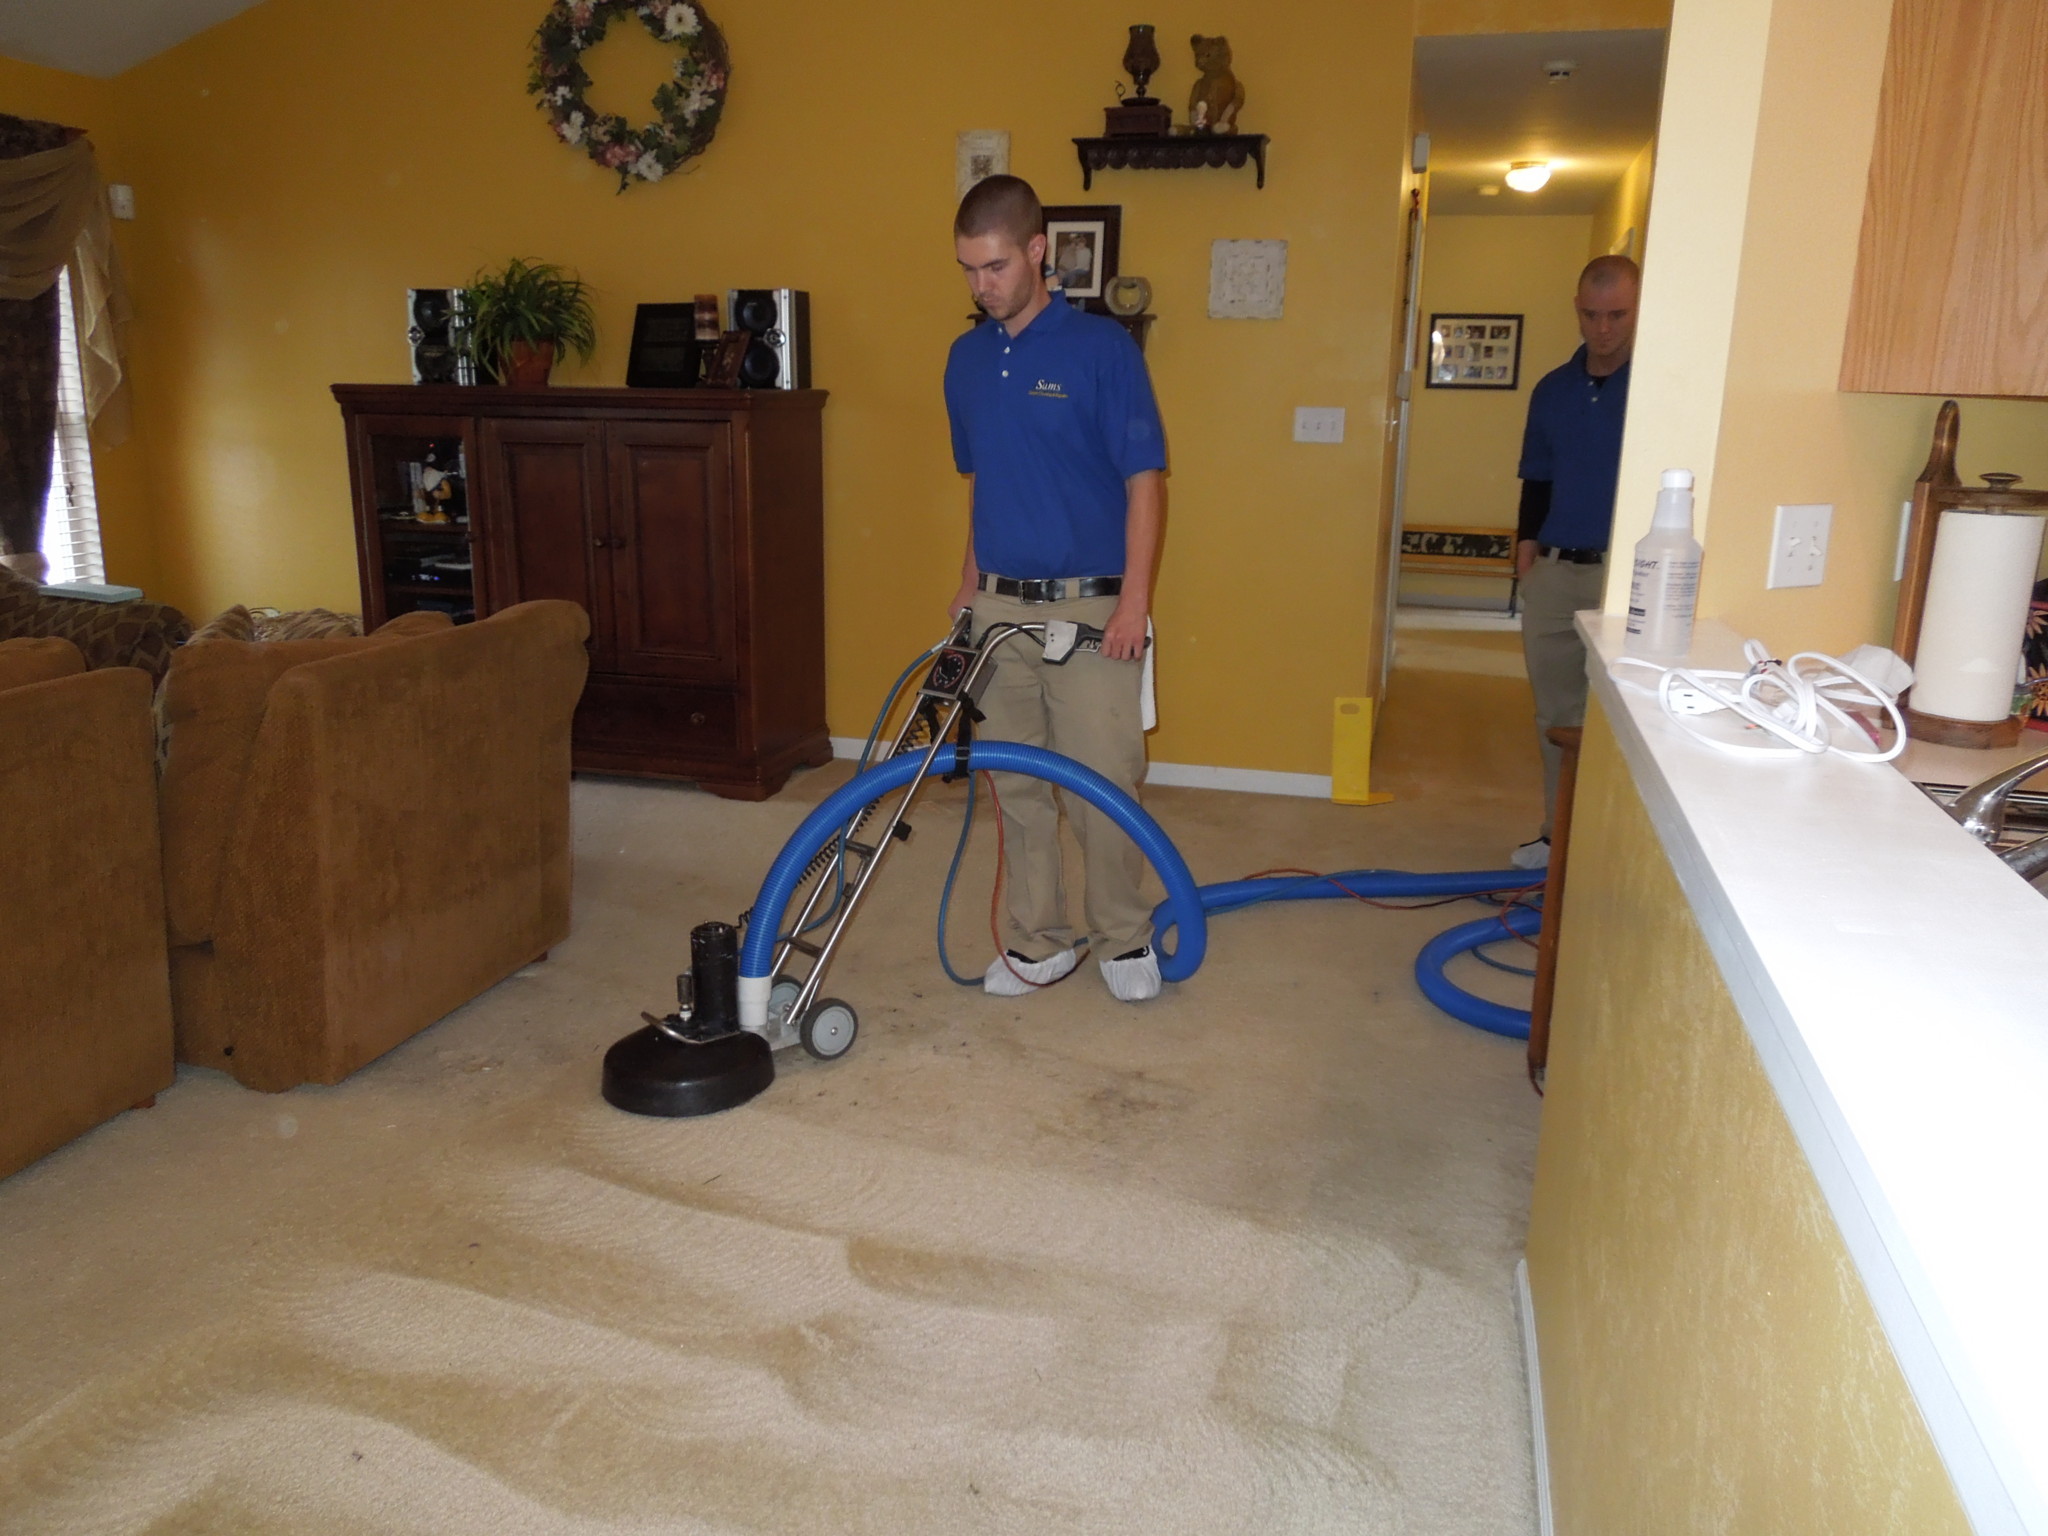 Carpet Cleaning Services Kansas City: All About Rotary Shampoo